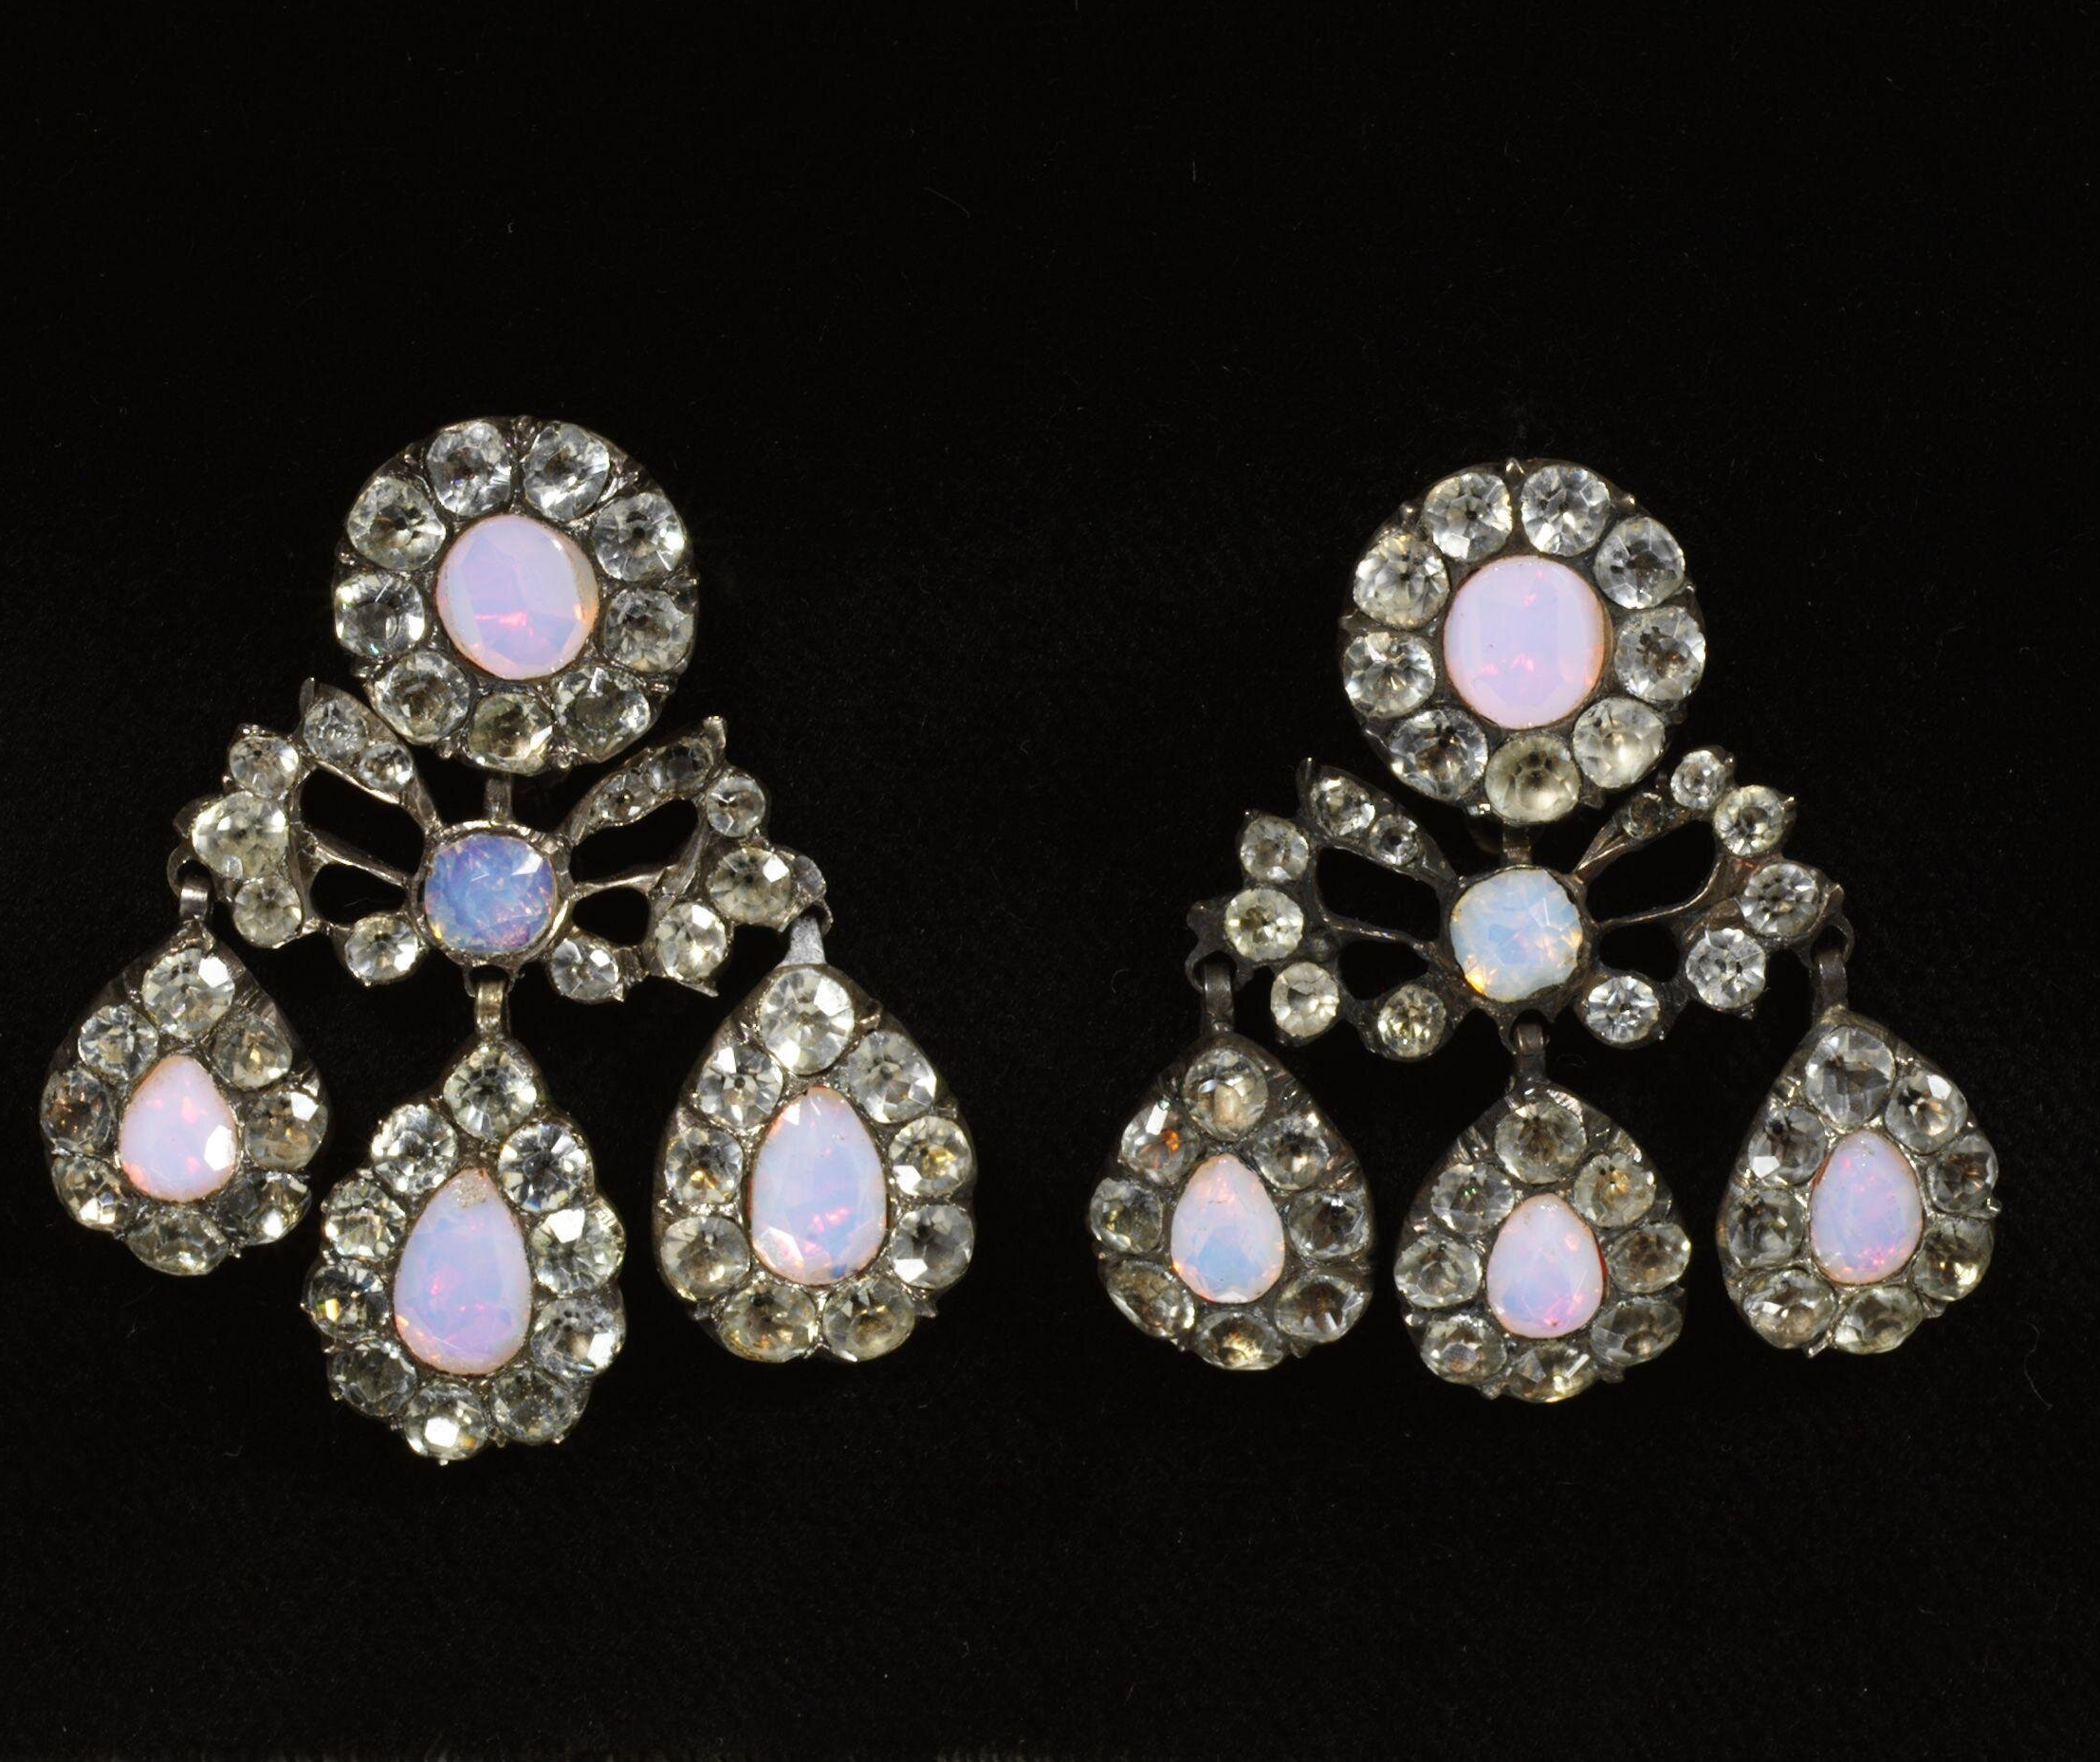 French opaline and white paste girandole earrings, 1760. The Victoria & Albert Museum